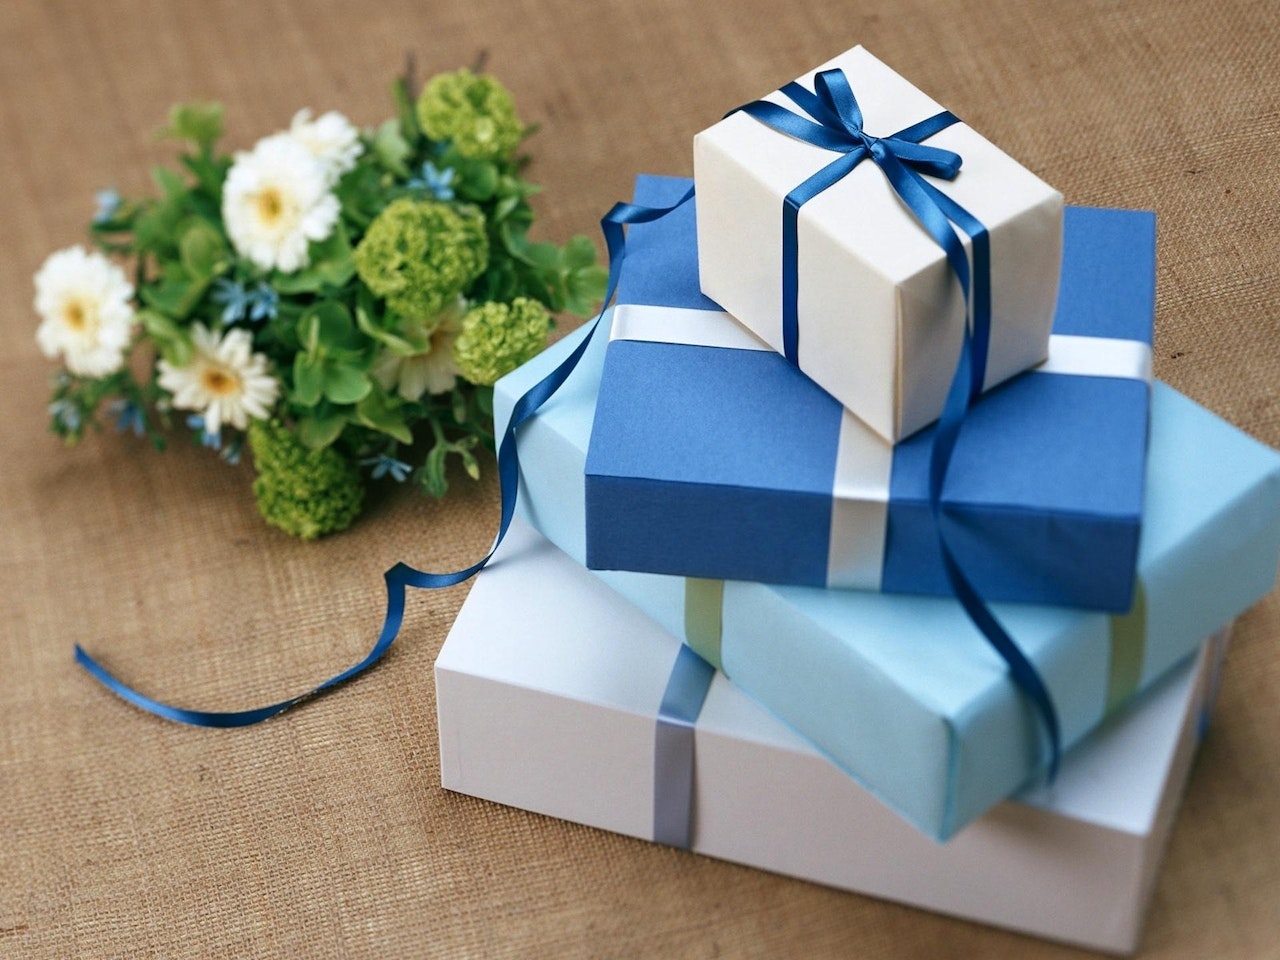 Stacked Blue And White Colored Gift Boxes with flowers beside it